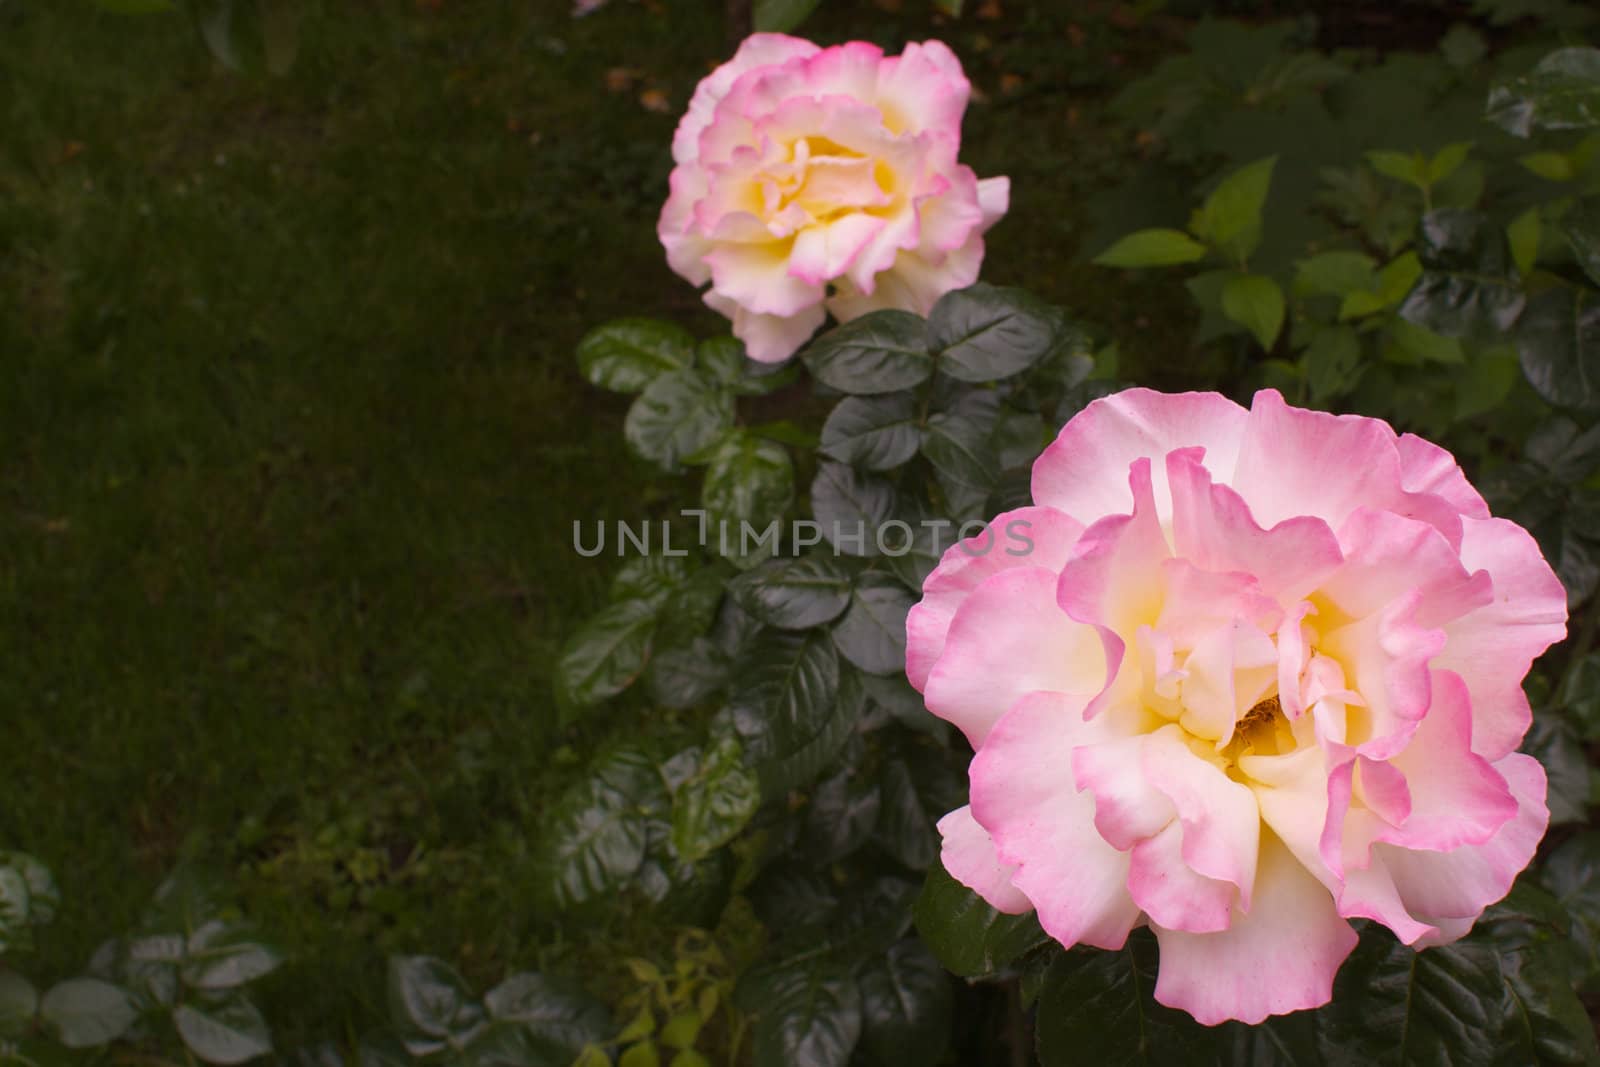 a large pink and yellow rose taken with a shallow depth of field creating a soft focus of green leaves and another rose